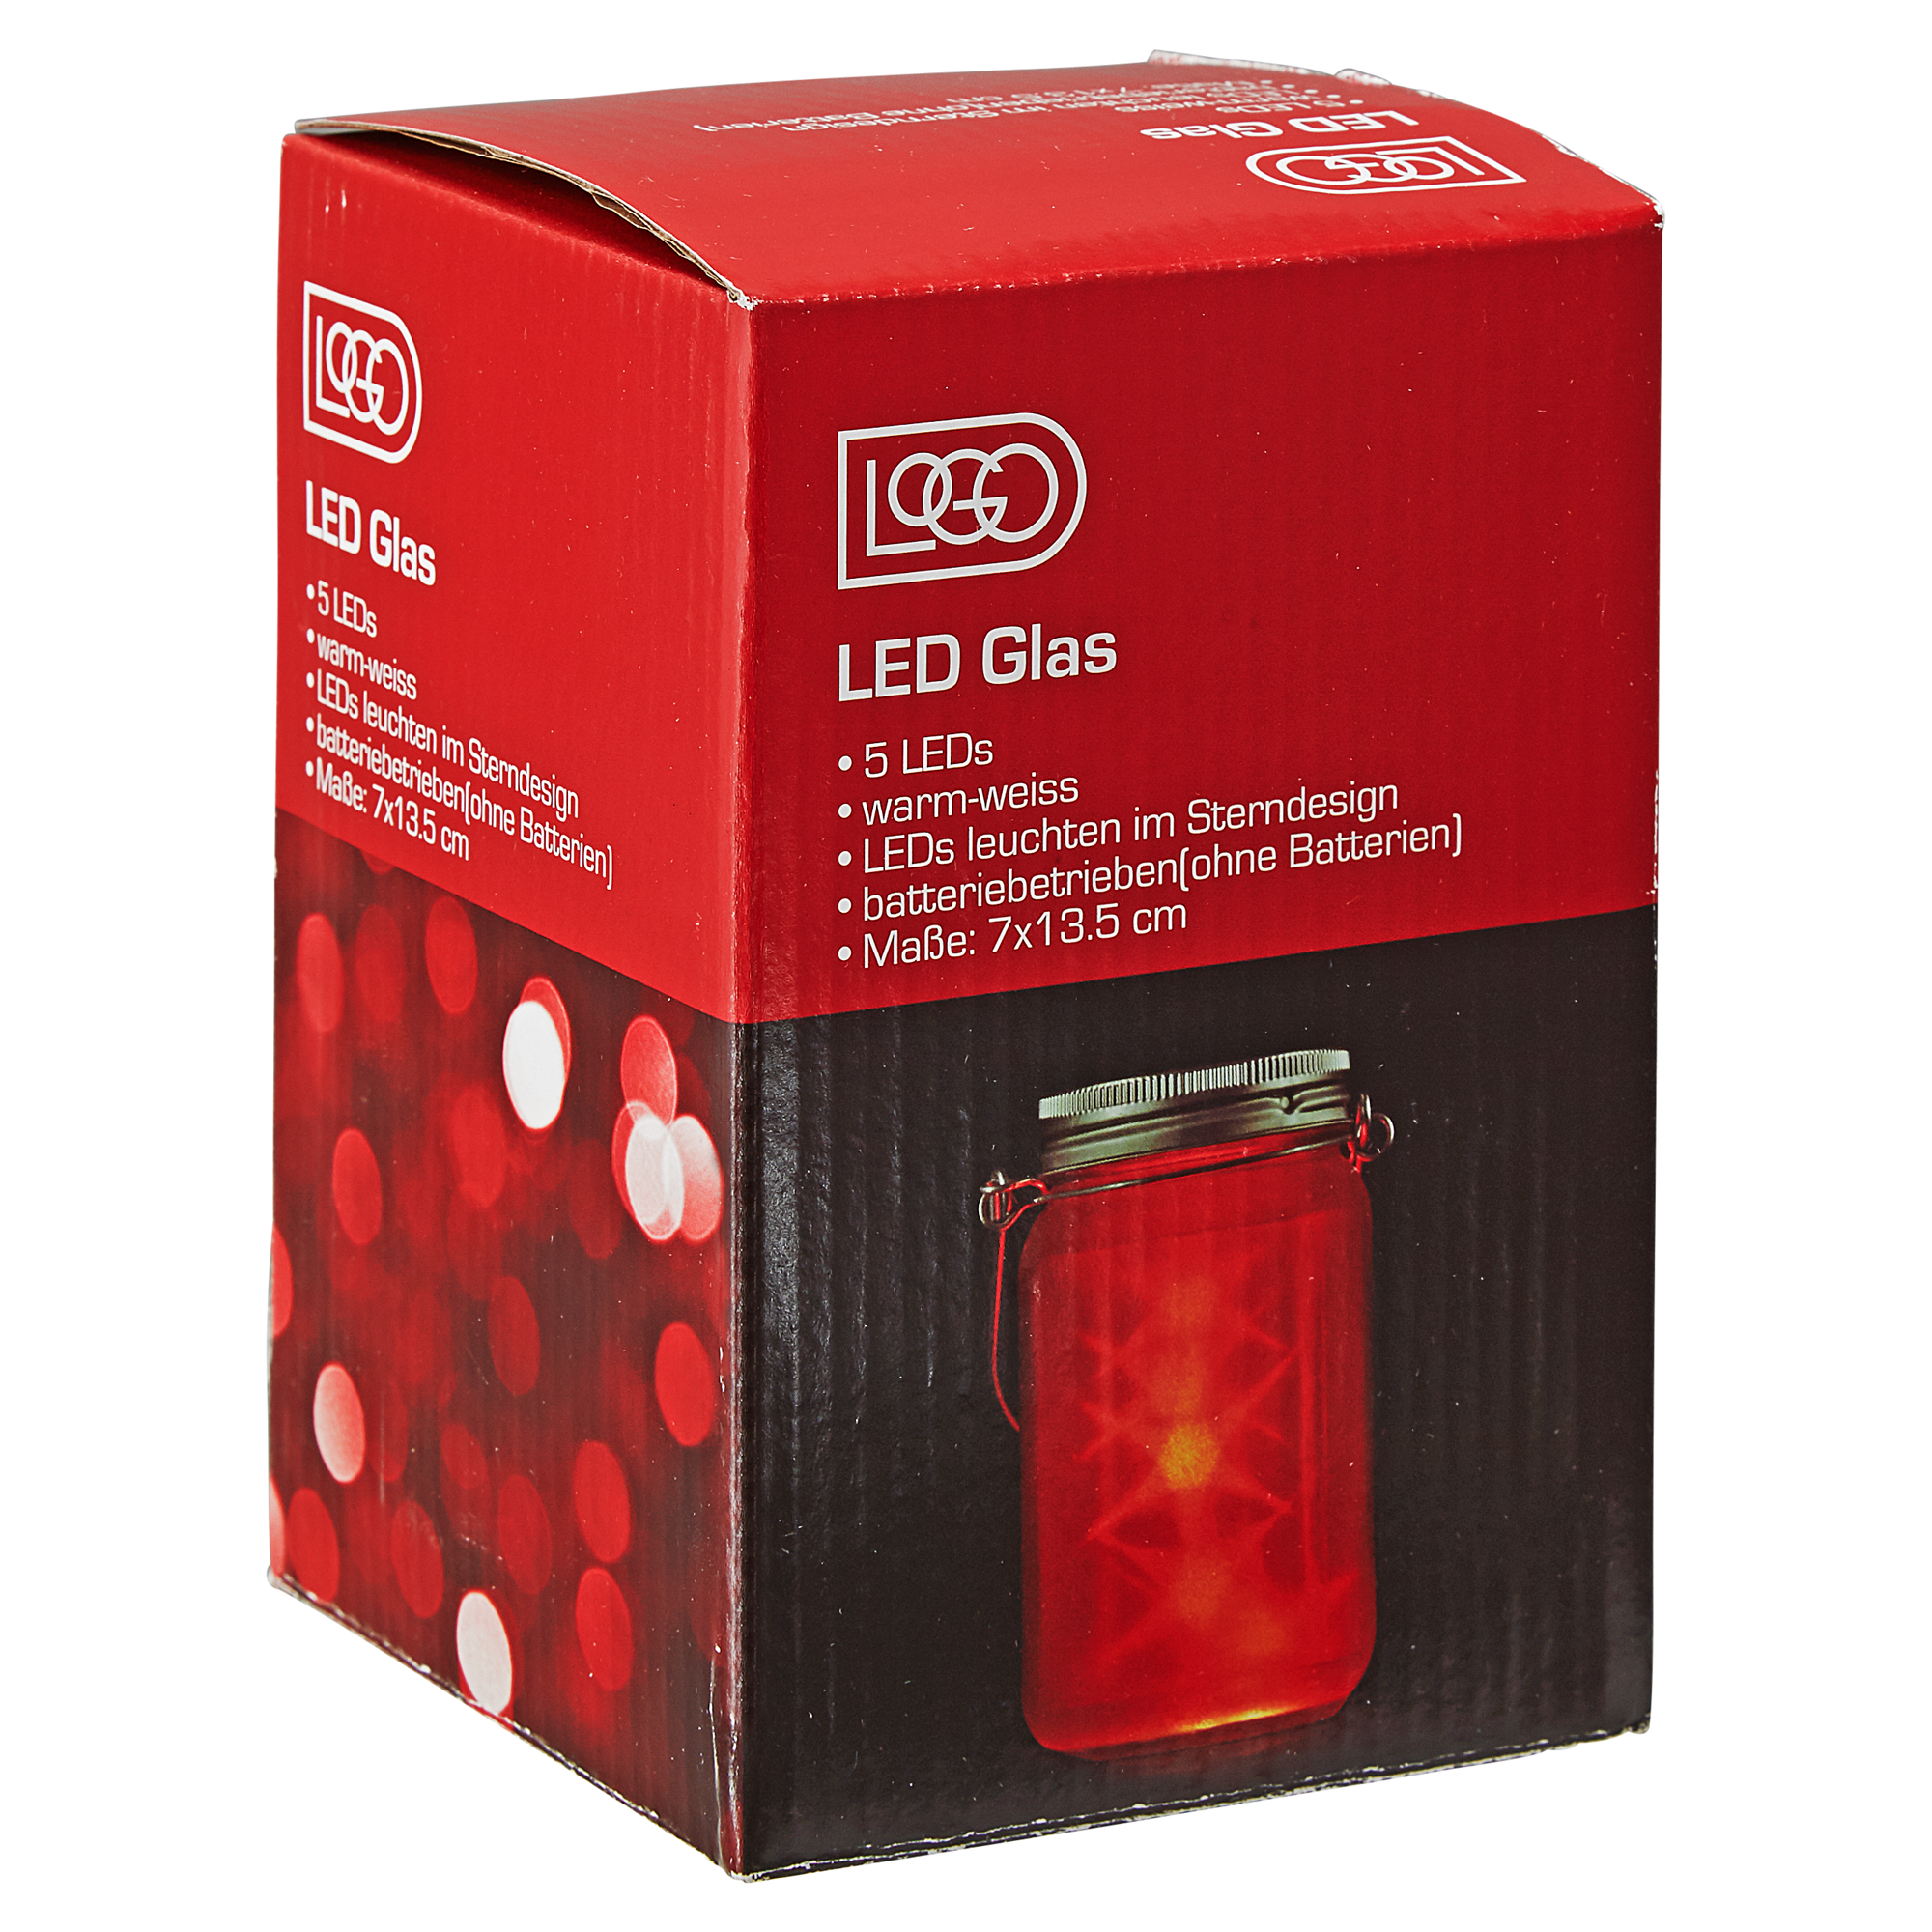 LED-Glas rot Ø 7 x 13,5 cm + product picture